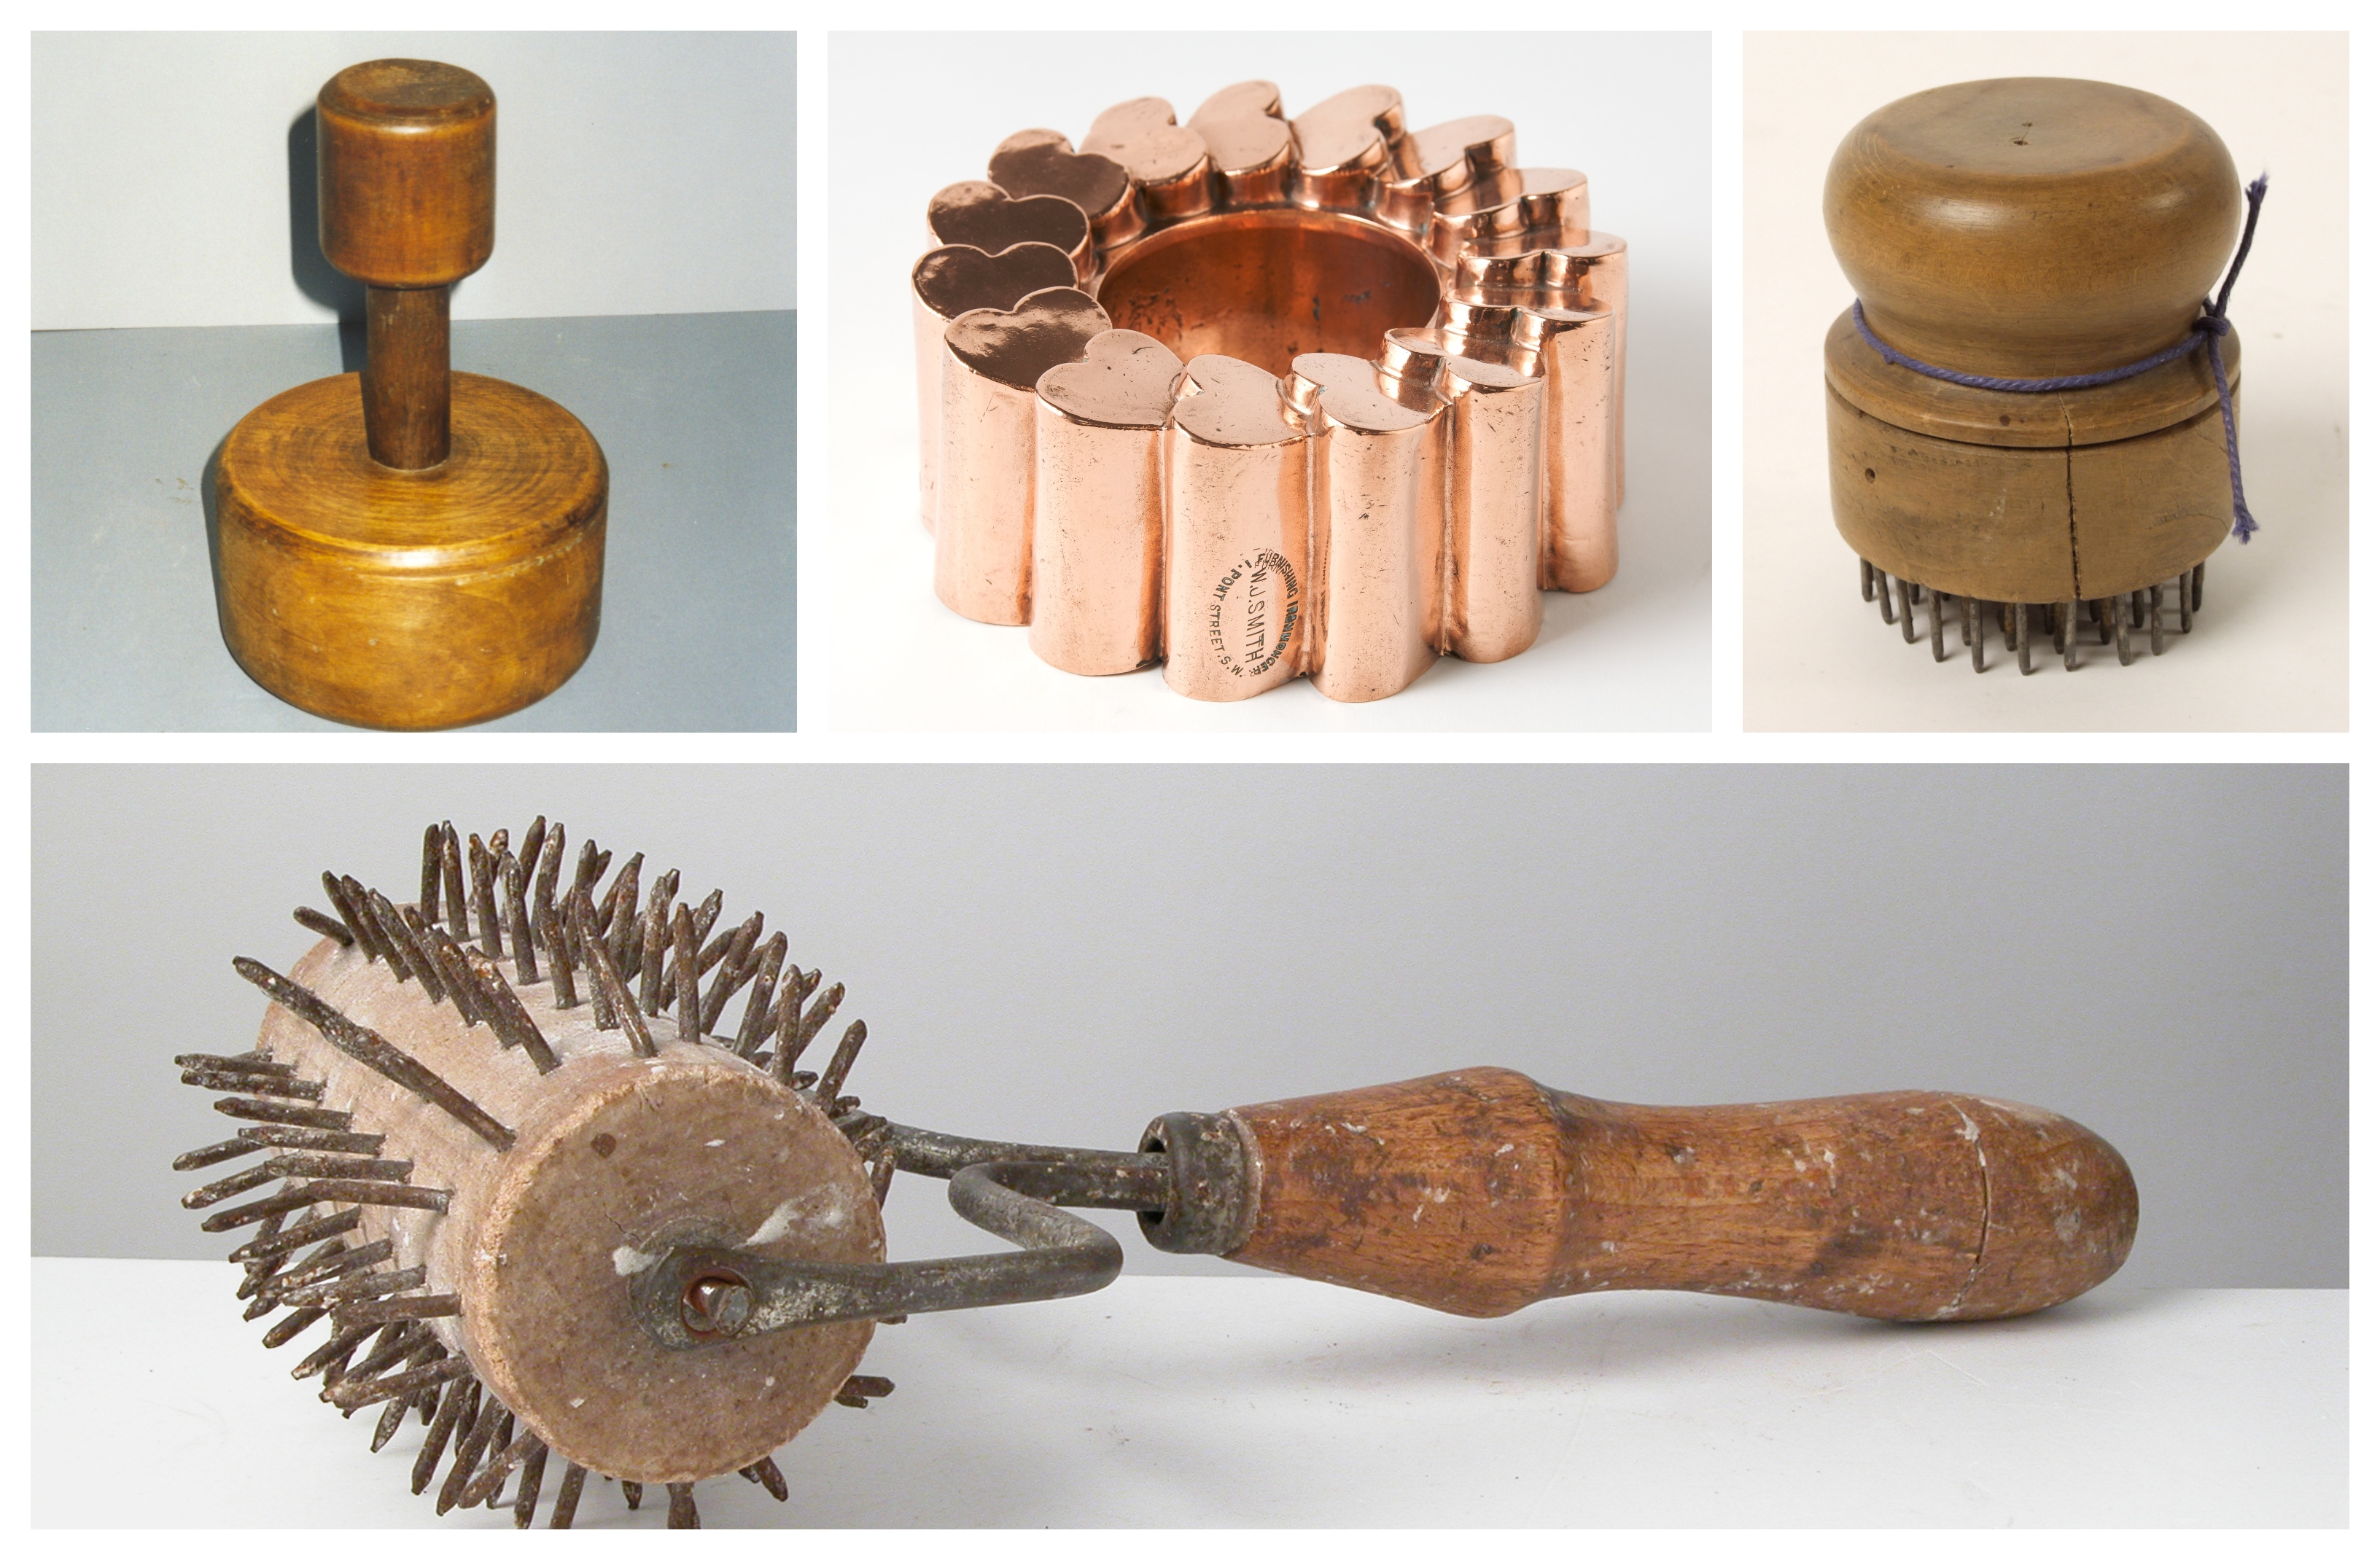 5 photogrpahs of curious baking implements., two stamps, a ring mould, and a roller with metal spikes.